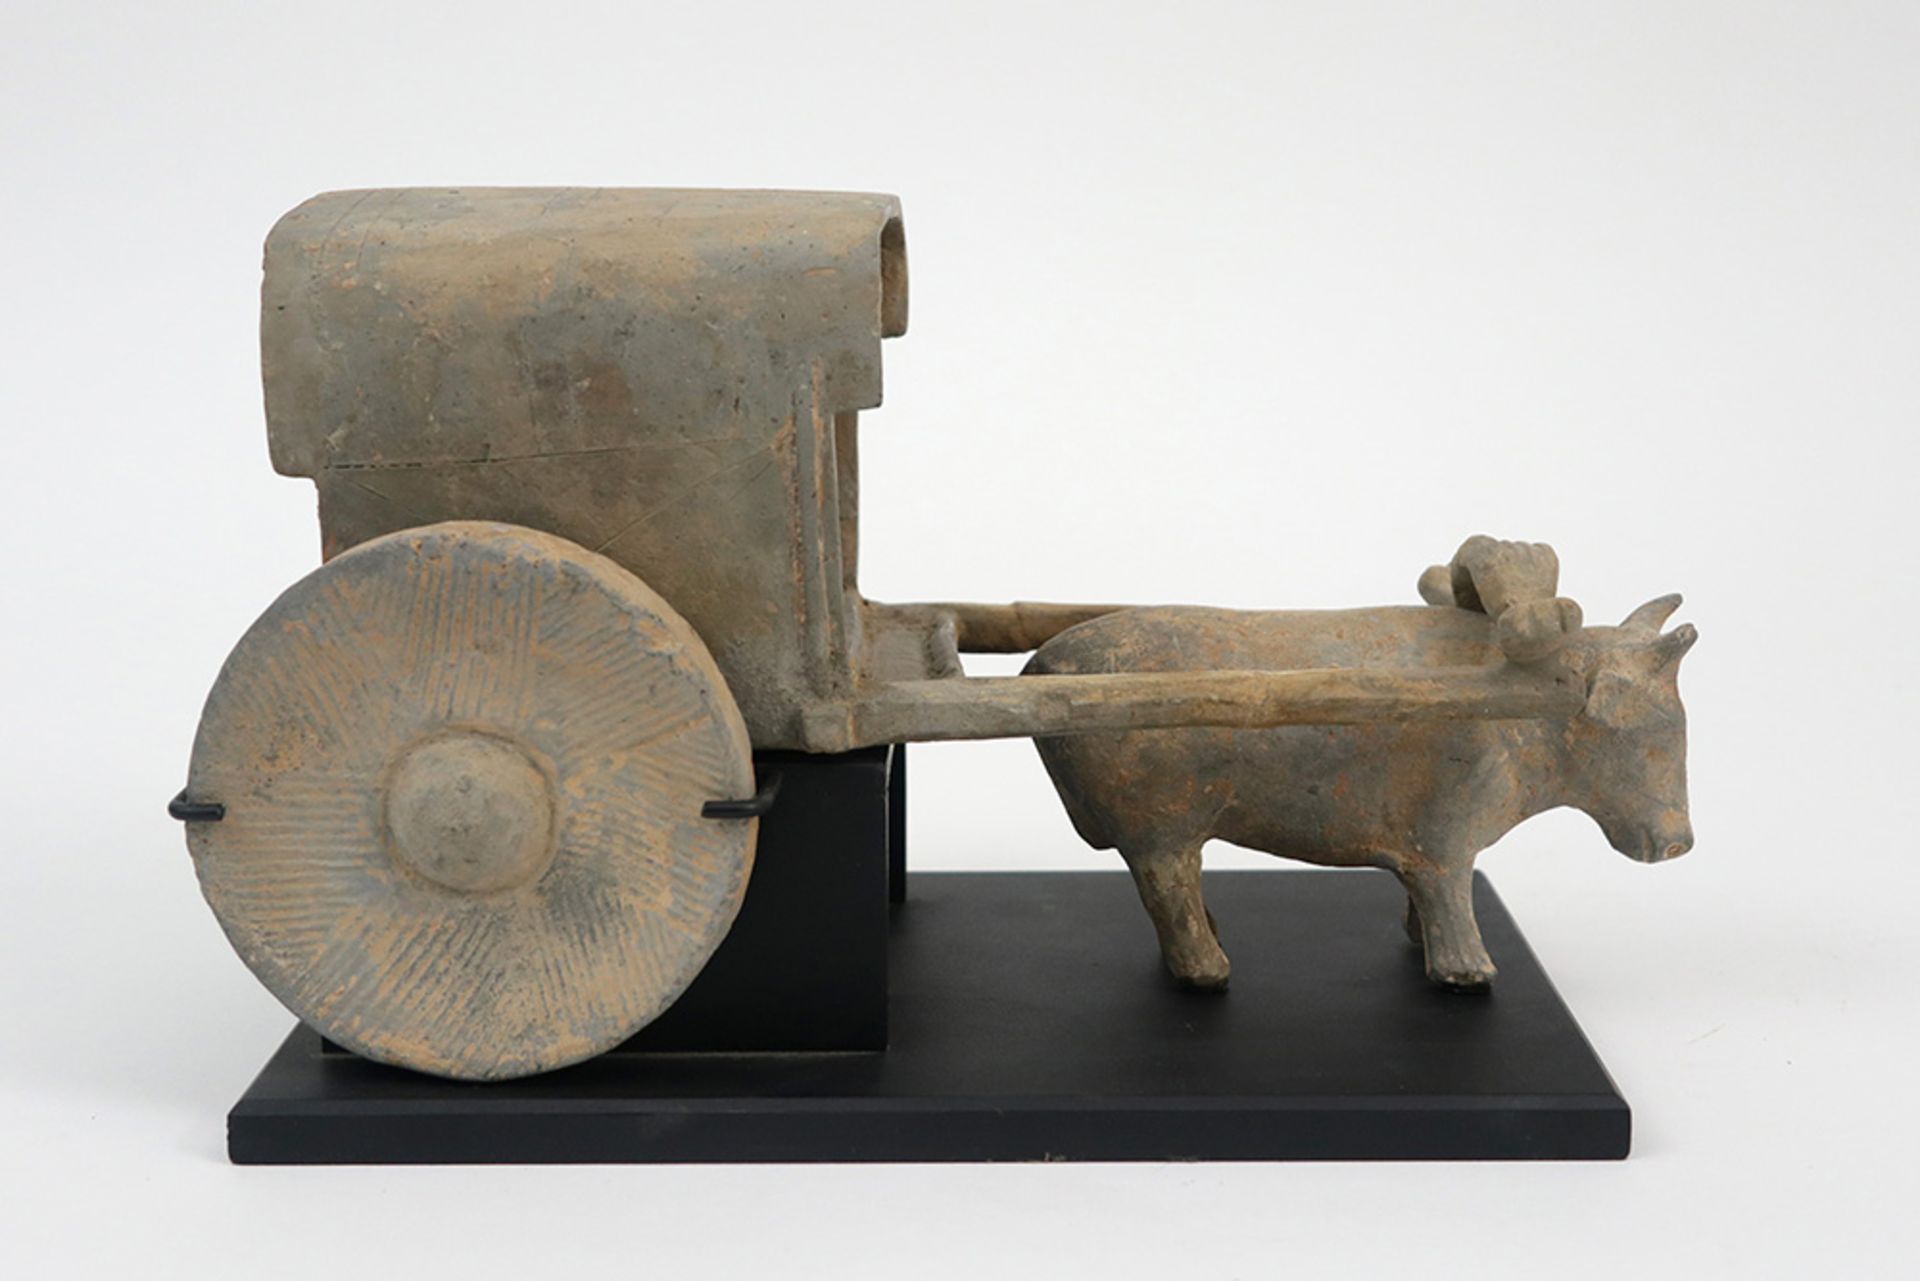 Chinese Han period tomb find : a sculpture in earthenware depicting a carriage with two wheels